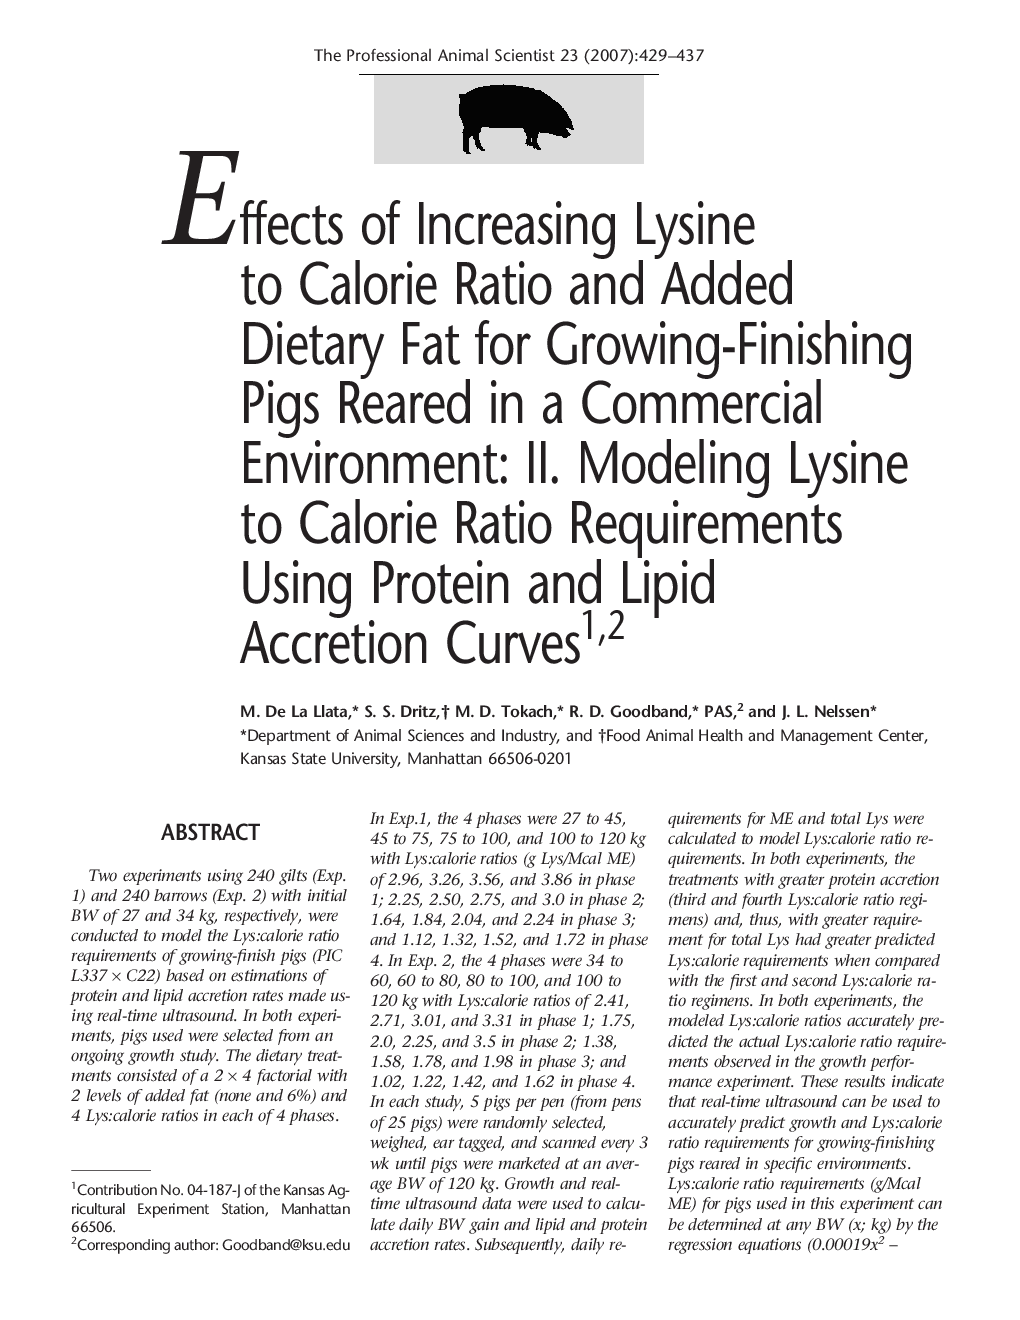 Effects of Increasing Lysine to Calorie Ratio and Added Dietary Fat for Growing-Finishing Pigs Reared in a Commercial Environment: II. Modeling Lysine to Calorie Ratio Requirements Using Protein and Lipid Accretion Curves12